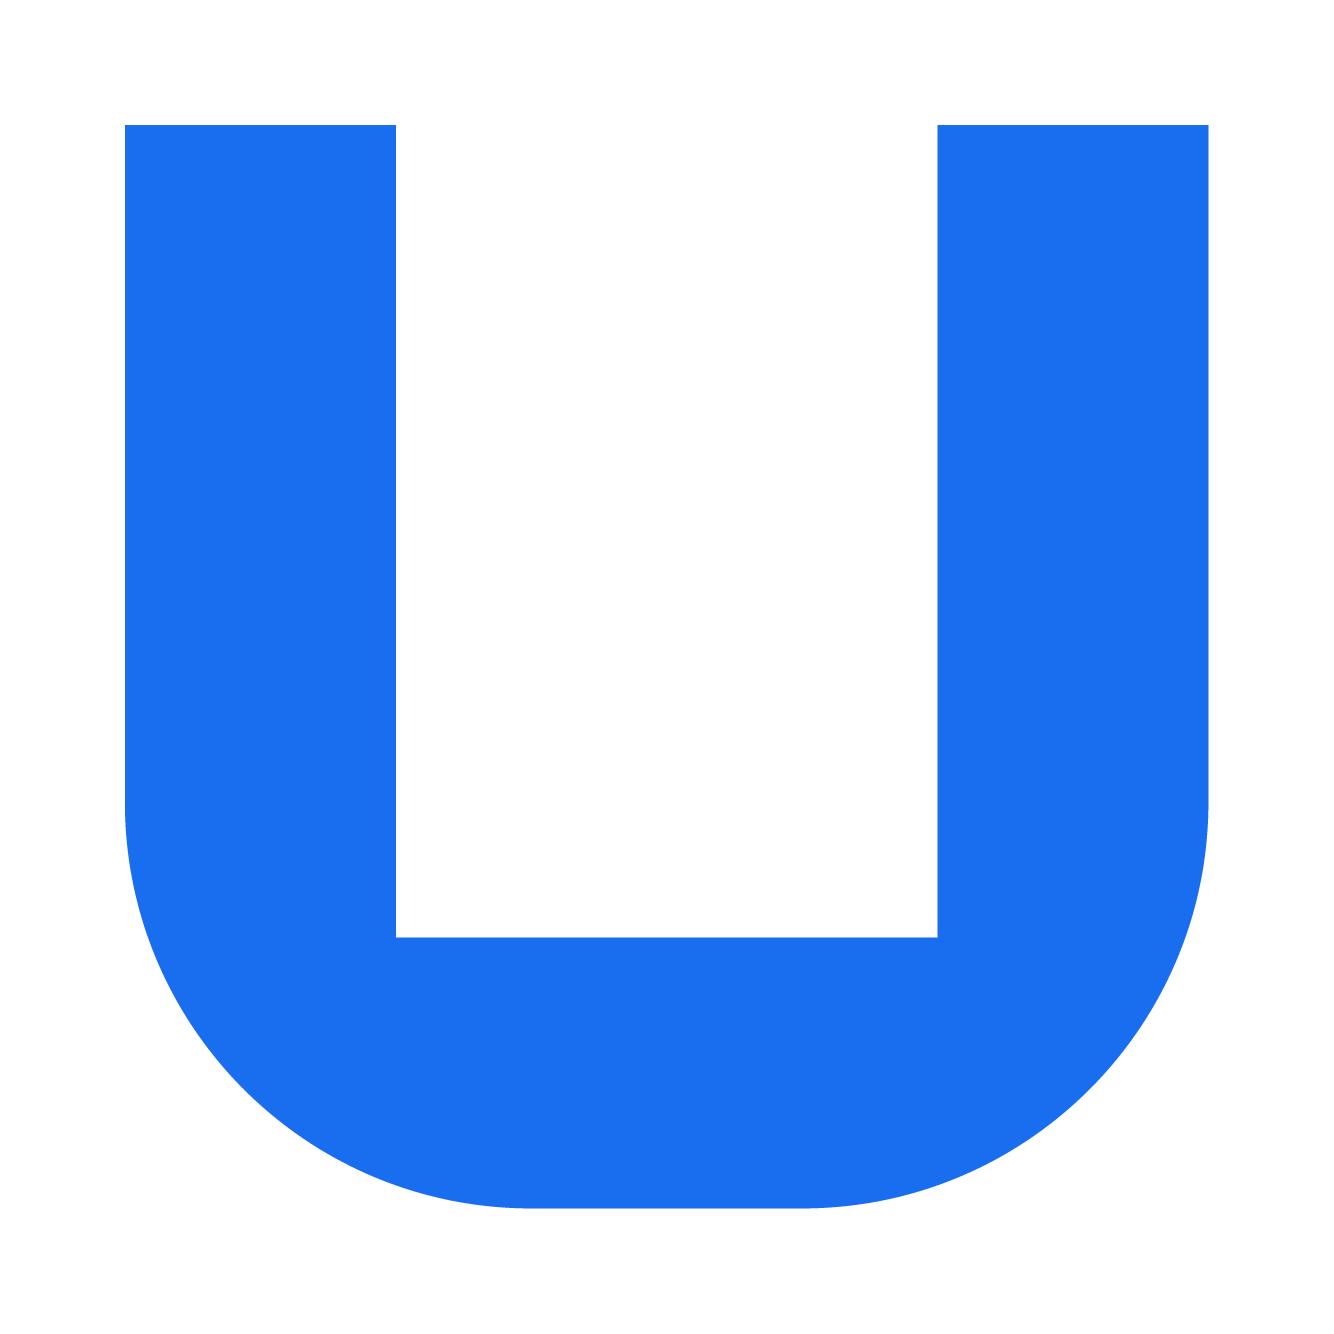 The new stand alone Ultimaker logo. Image via Ultimaker.